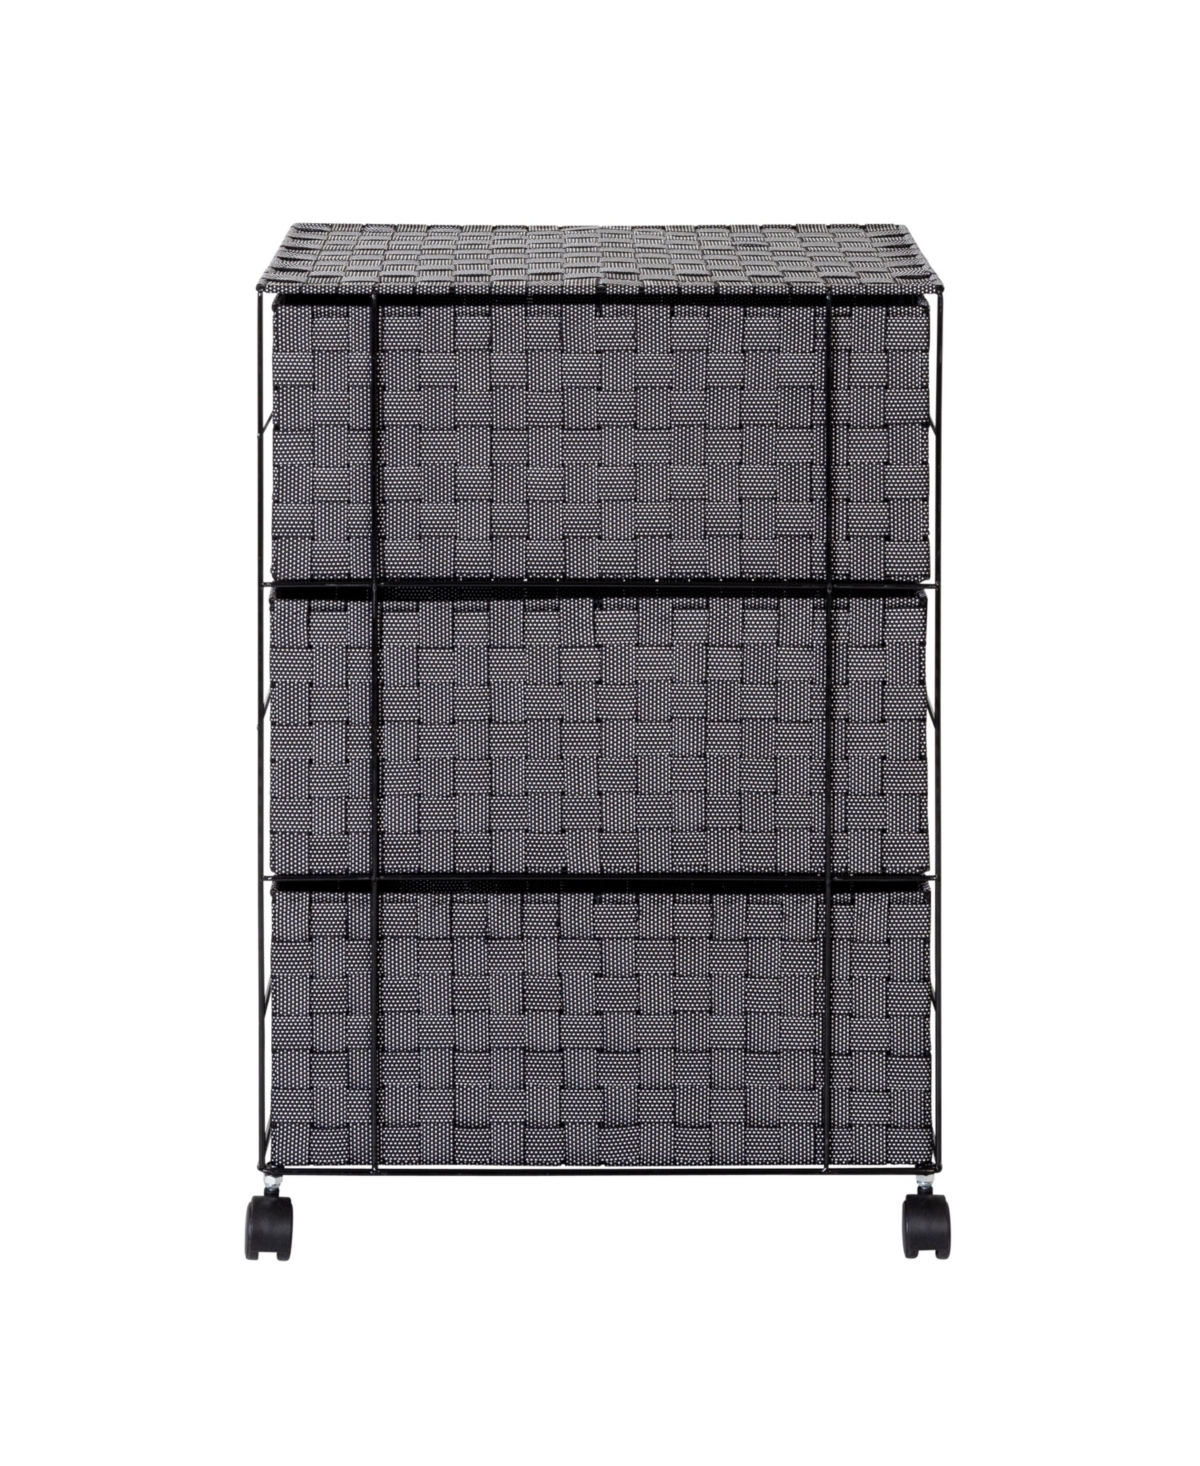 Shop Honey Can Do 3 Drawer Woven With Wheels Home Office Organizer In Black